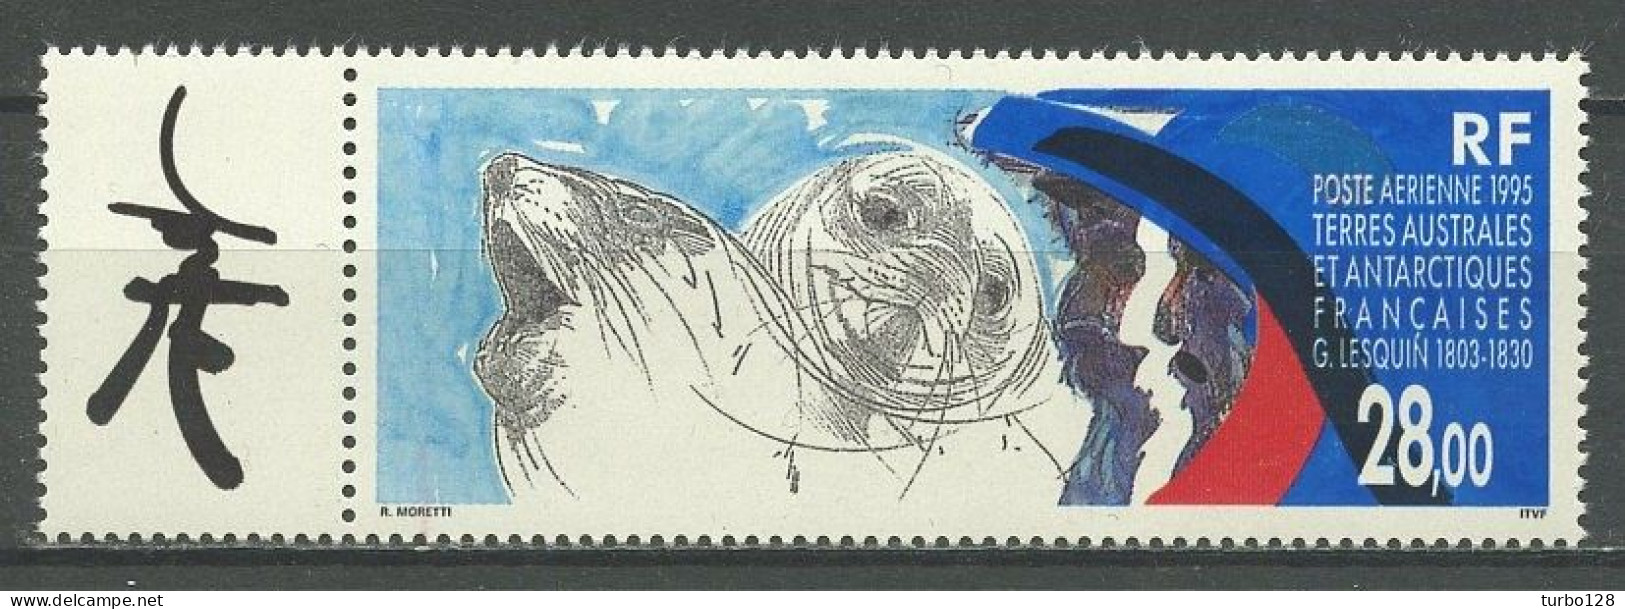 TAAF 1995 PA N° 136 ** Neuf MNH Superbe C 14,20 € Faune Animaux Animals - G. Lesquin Phoques - Airmail